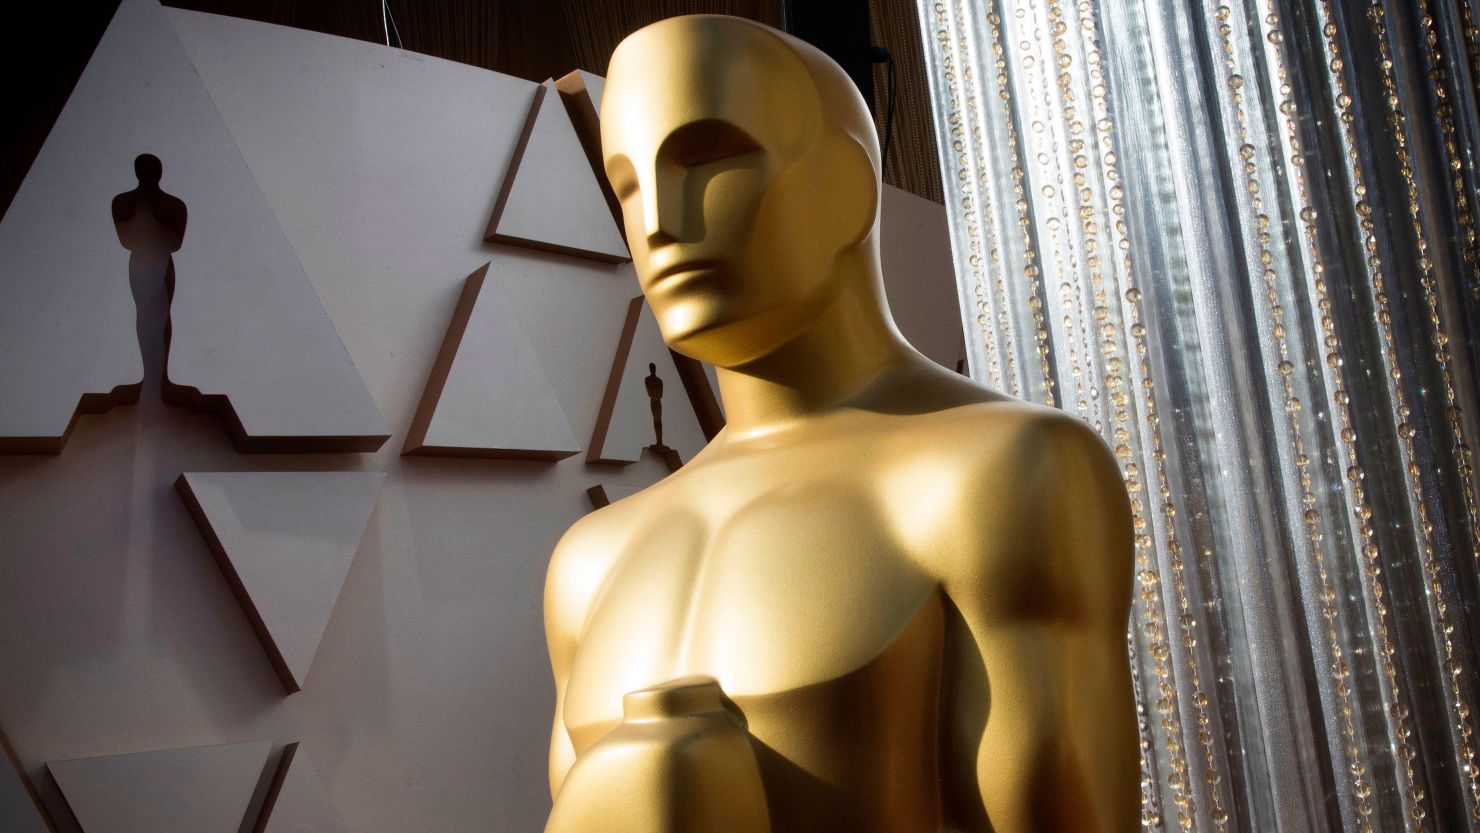 An Oscars statue is displayed on the red carpet area on the eve of the 92nd Oscars ceremony at the Dolby Theatre in Hollywood, California, on February 8, 2020.